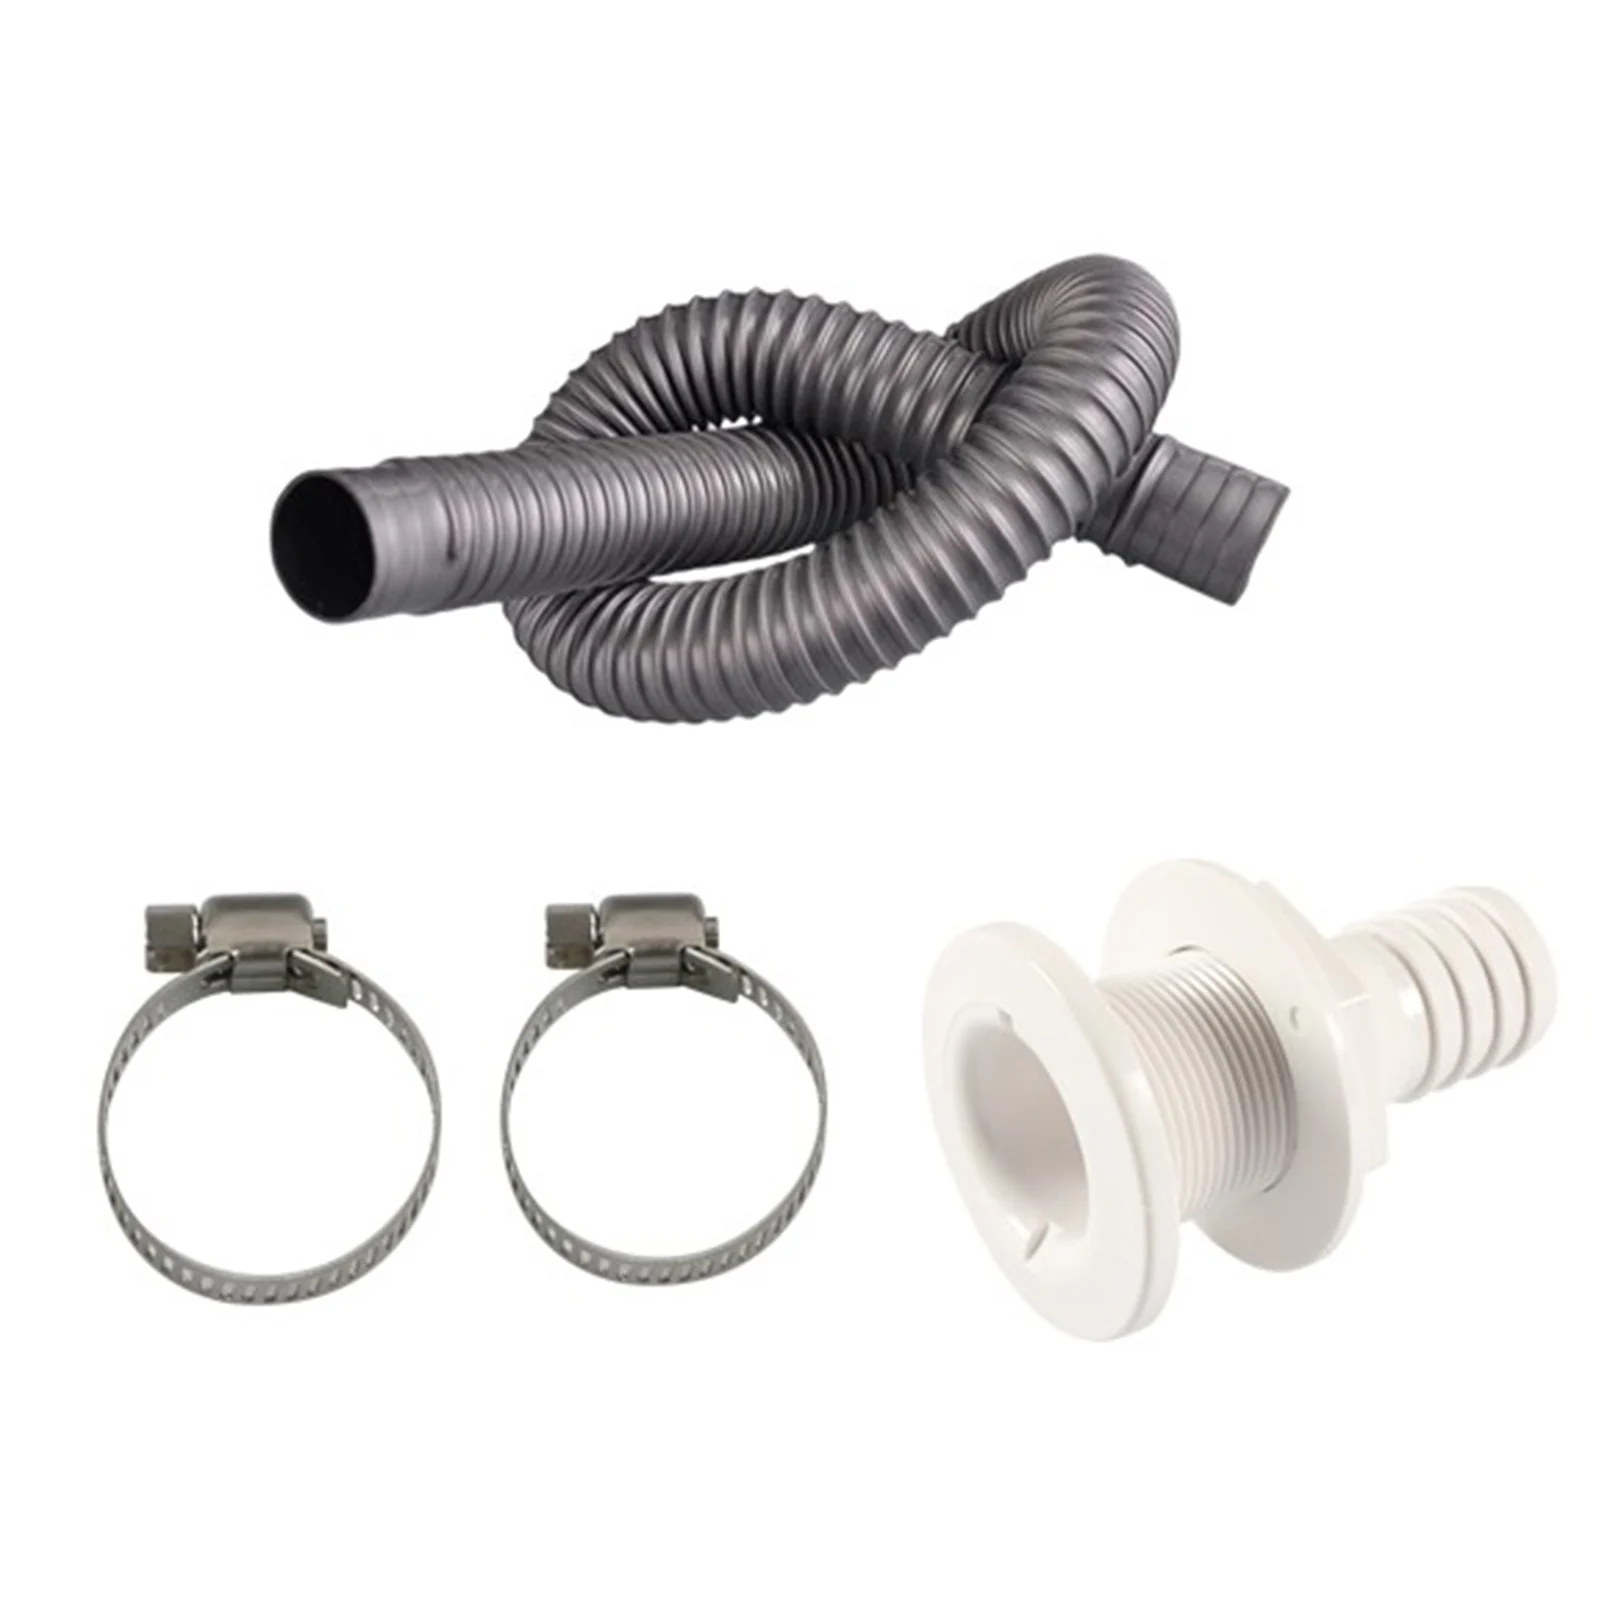 19/29mm Bilge Pump Hose Installation Kit Hose+Connecting Plug+Snap For Boats Parts Accessories 2022 New